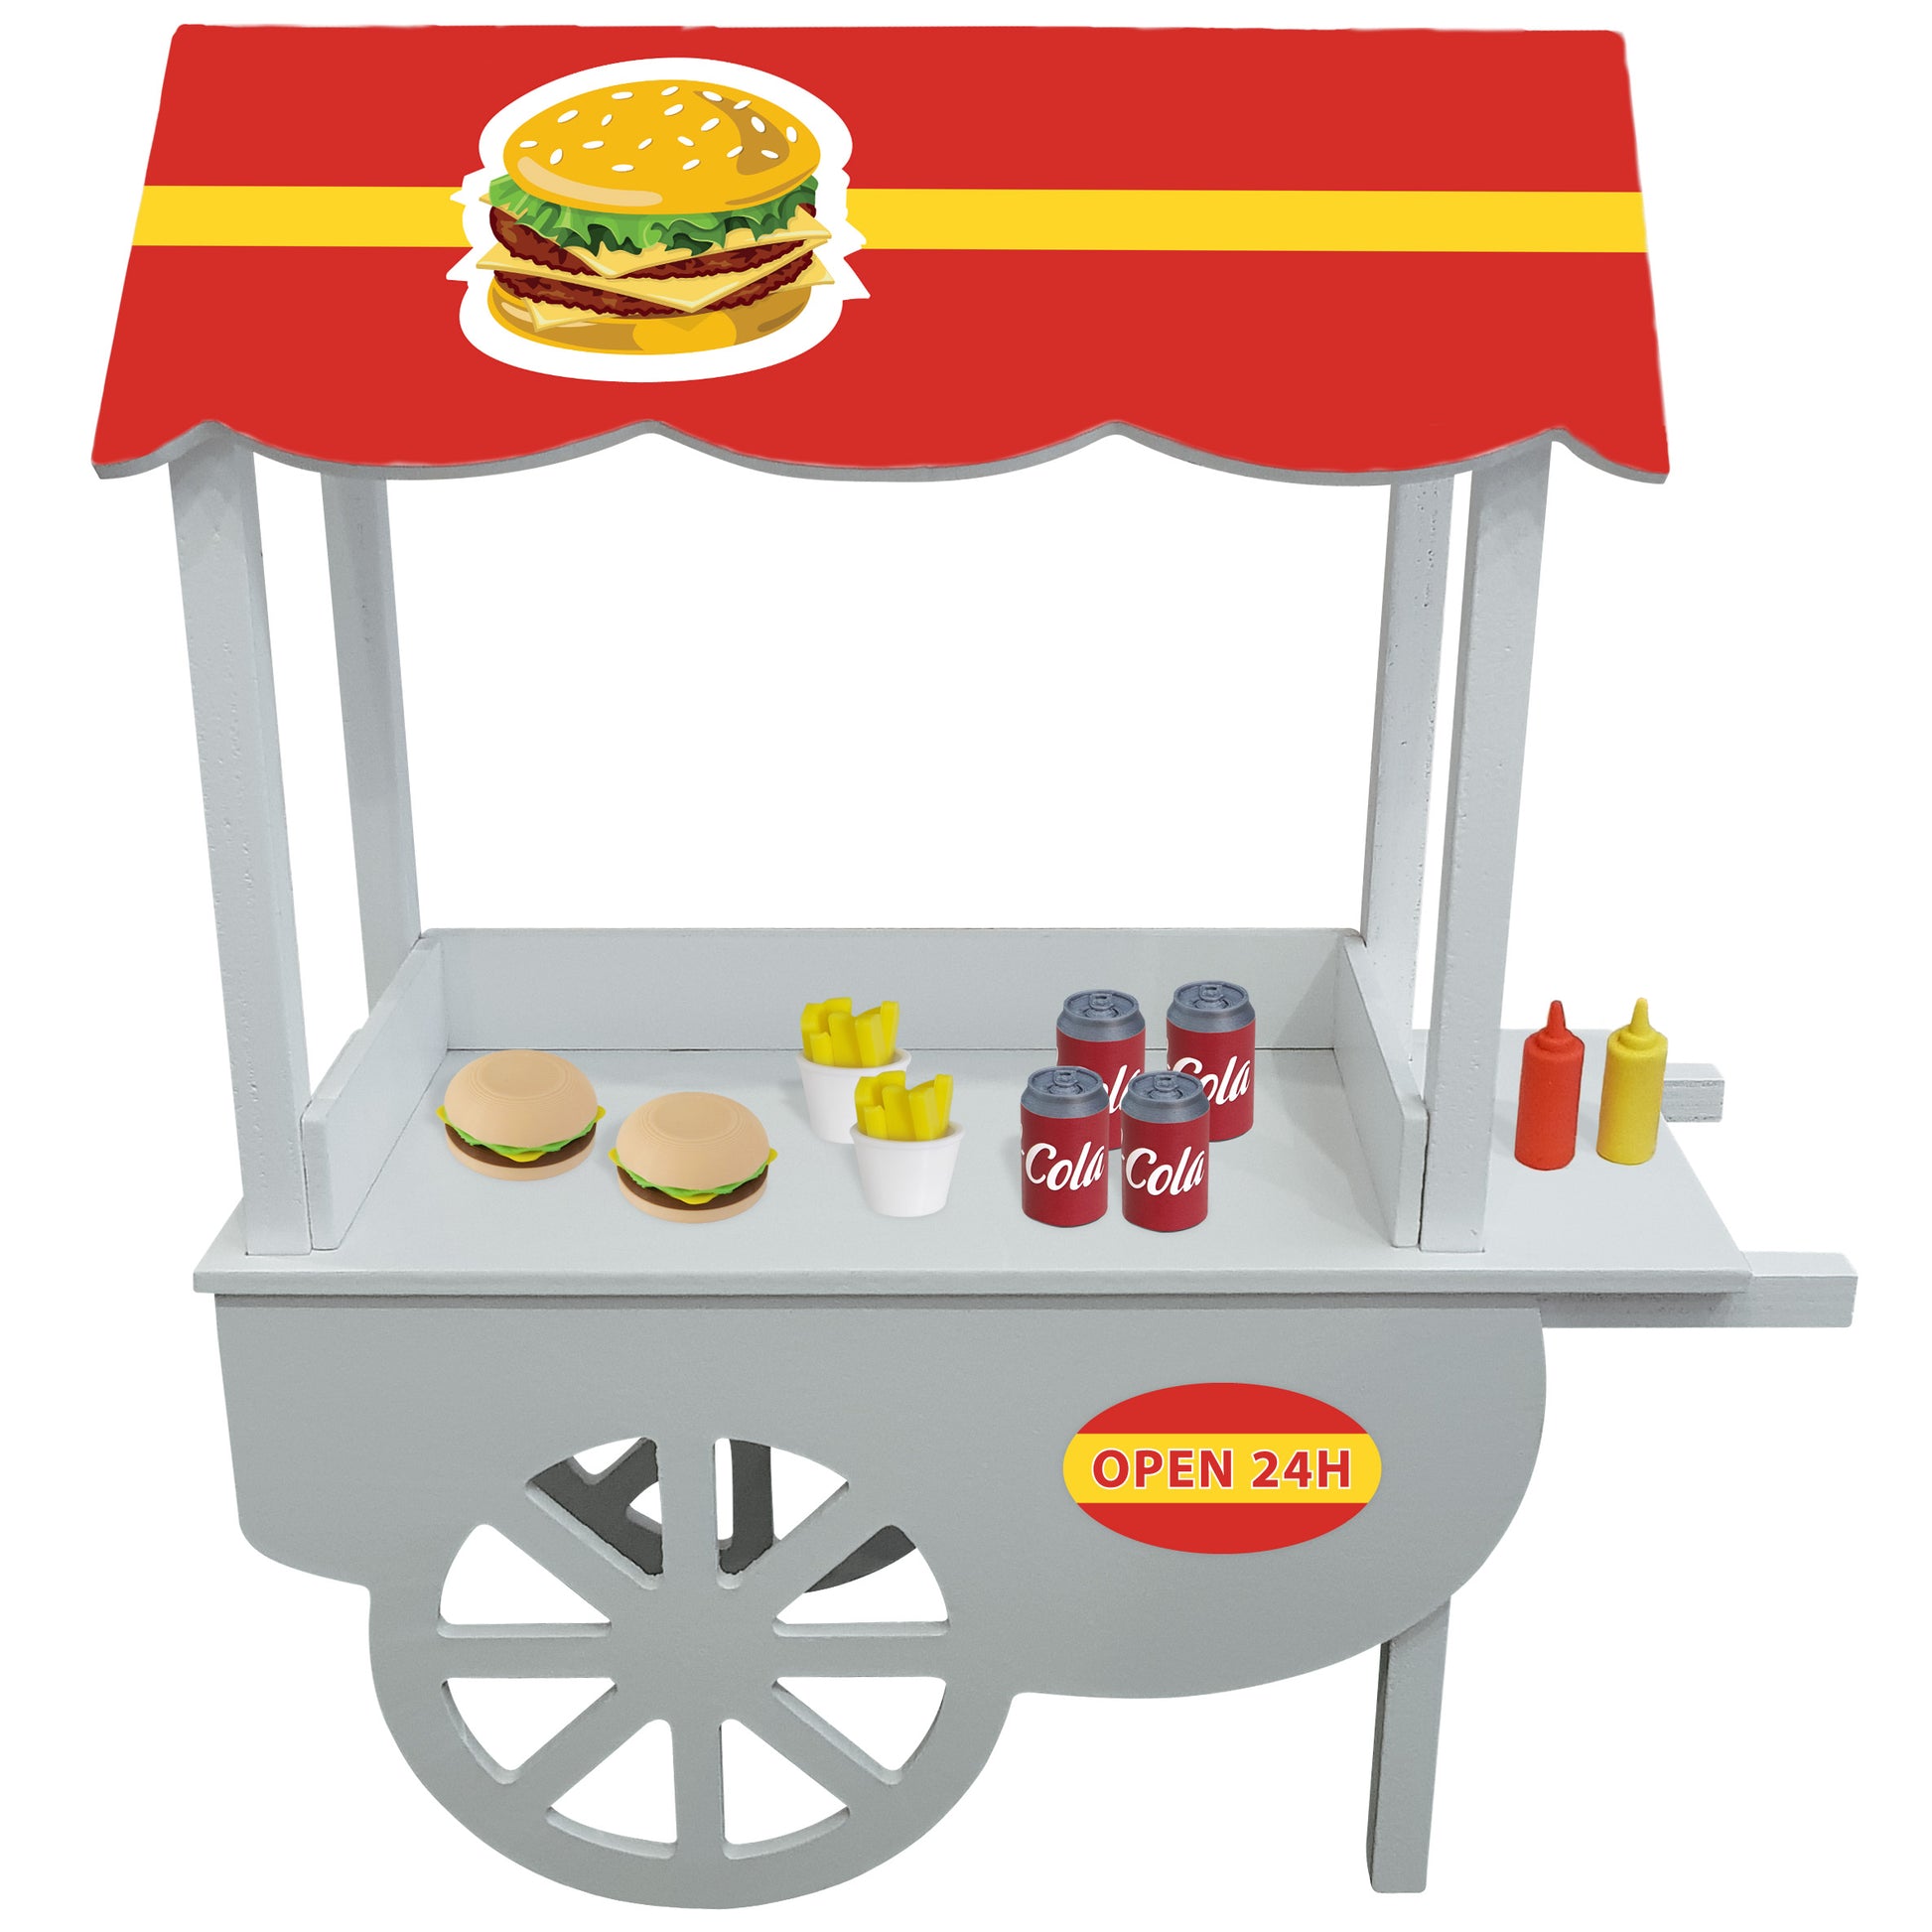 miniature elf fast food store. With miniature burgers, fries and coke